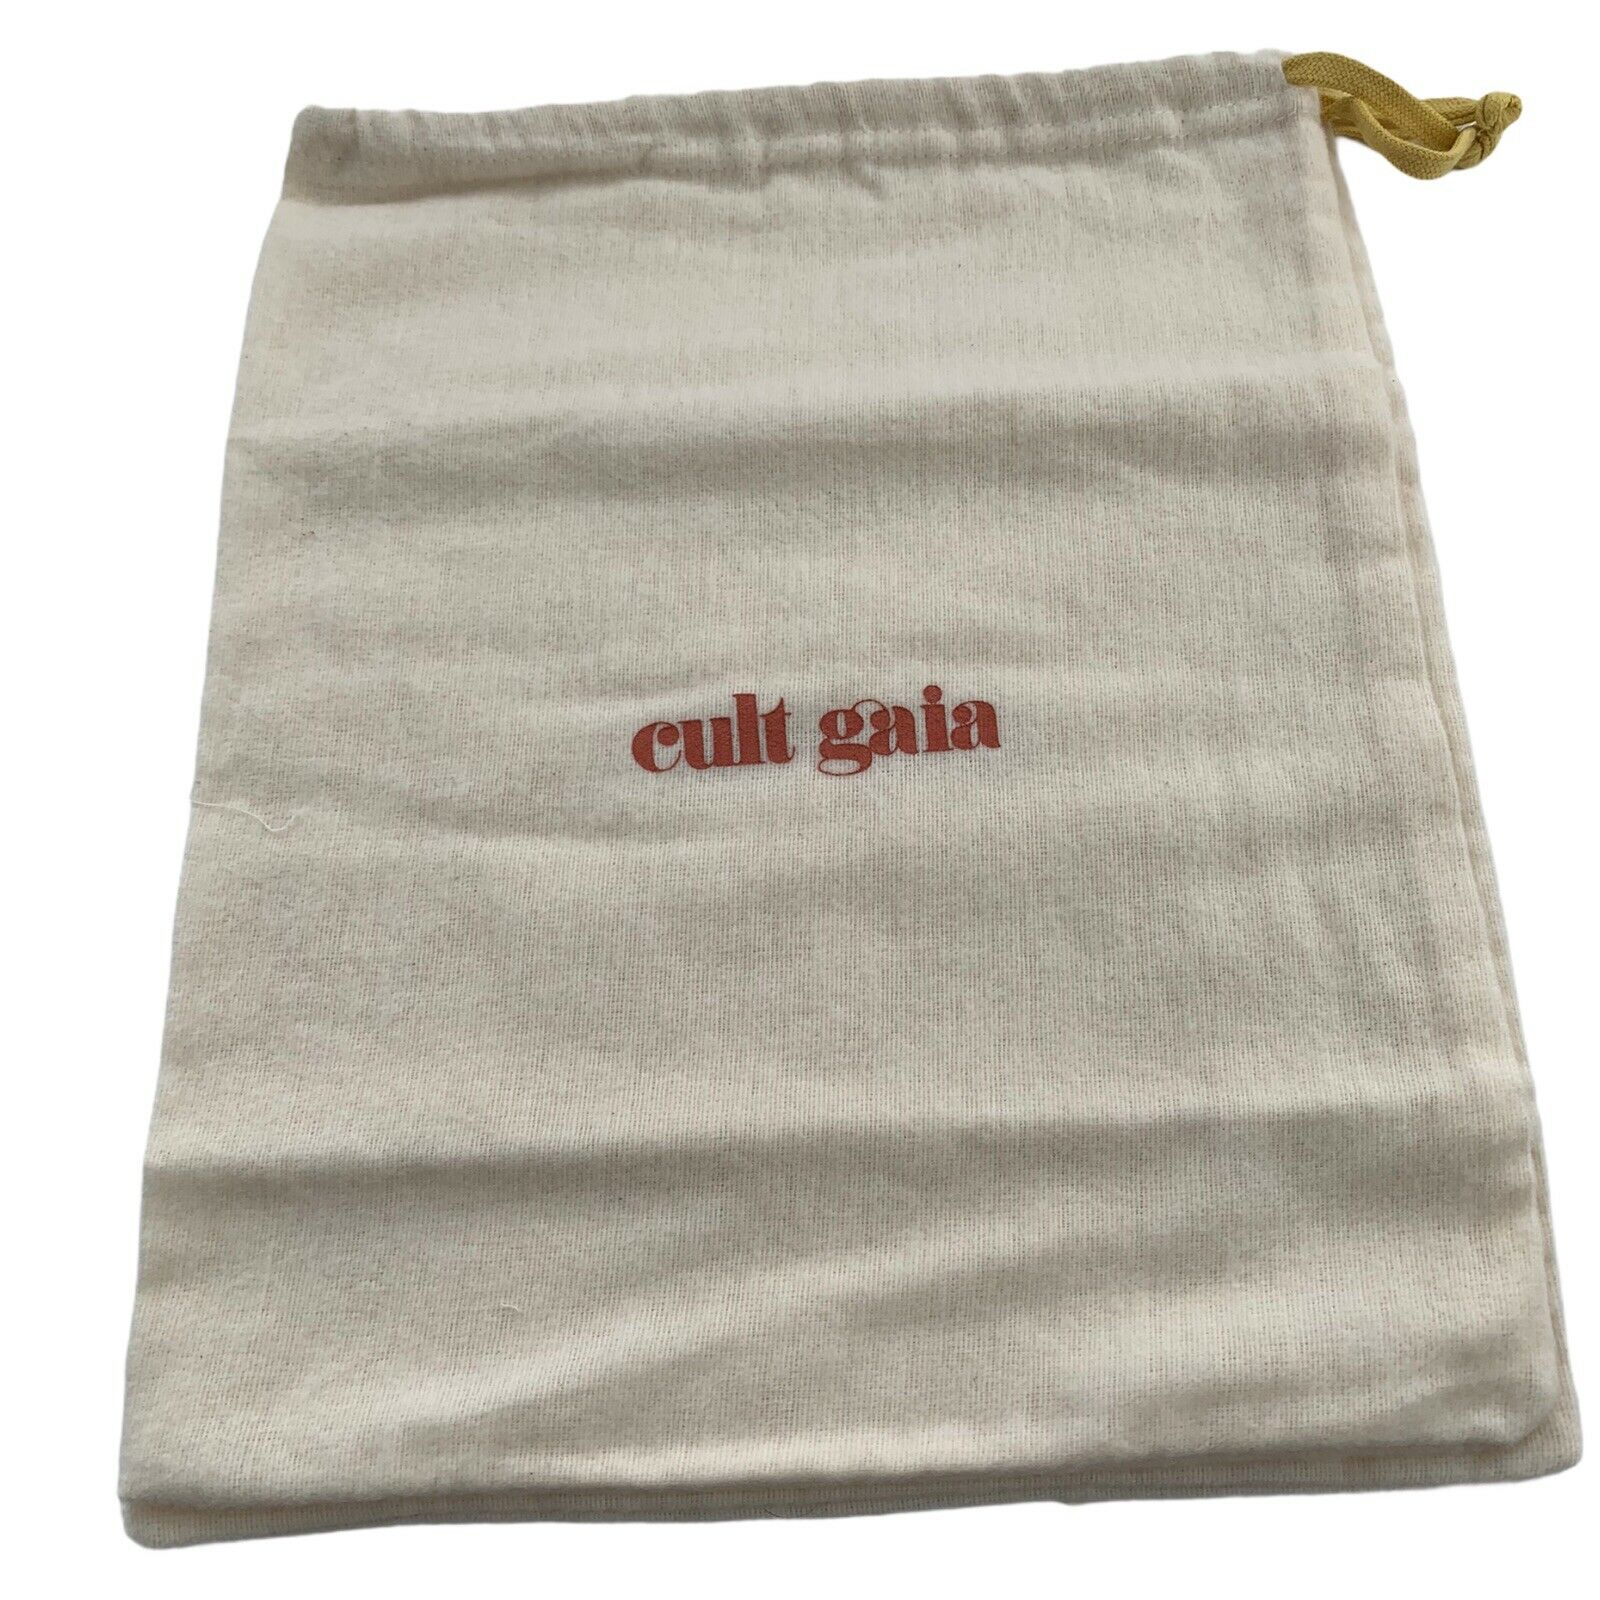 2 Cult Gaia Shoes Dust Bags 11 1/4"x 13 1/2" Great For Storage Gift Shoe Handbag